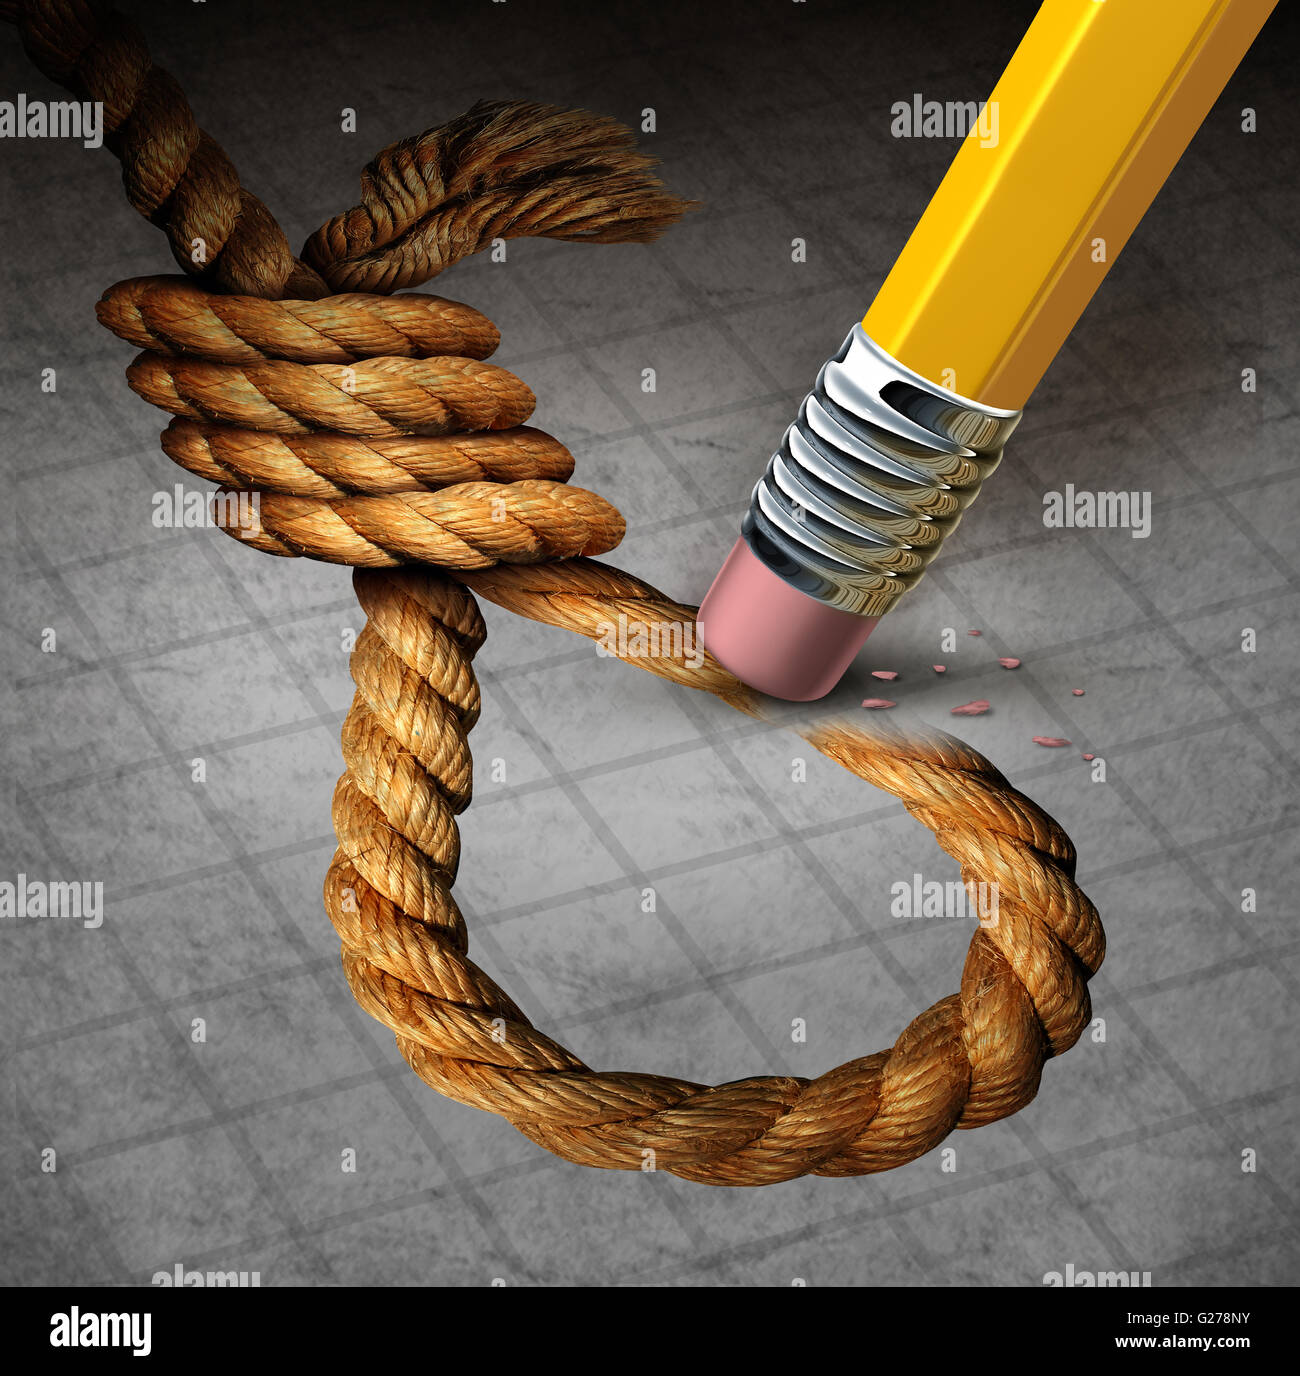 Suicide prevention psychology therapy and psychiatrist or psychologist treatment to stop depressed suicidal people from ending thier lives or hurting themselves as pencil erasing a noose with 3D illustration elements. Stock Photo